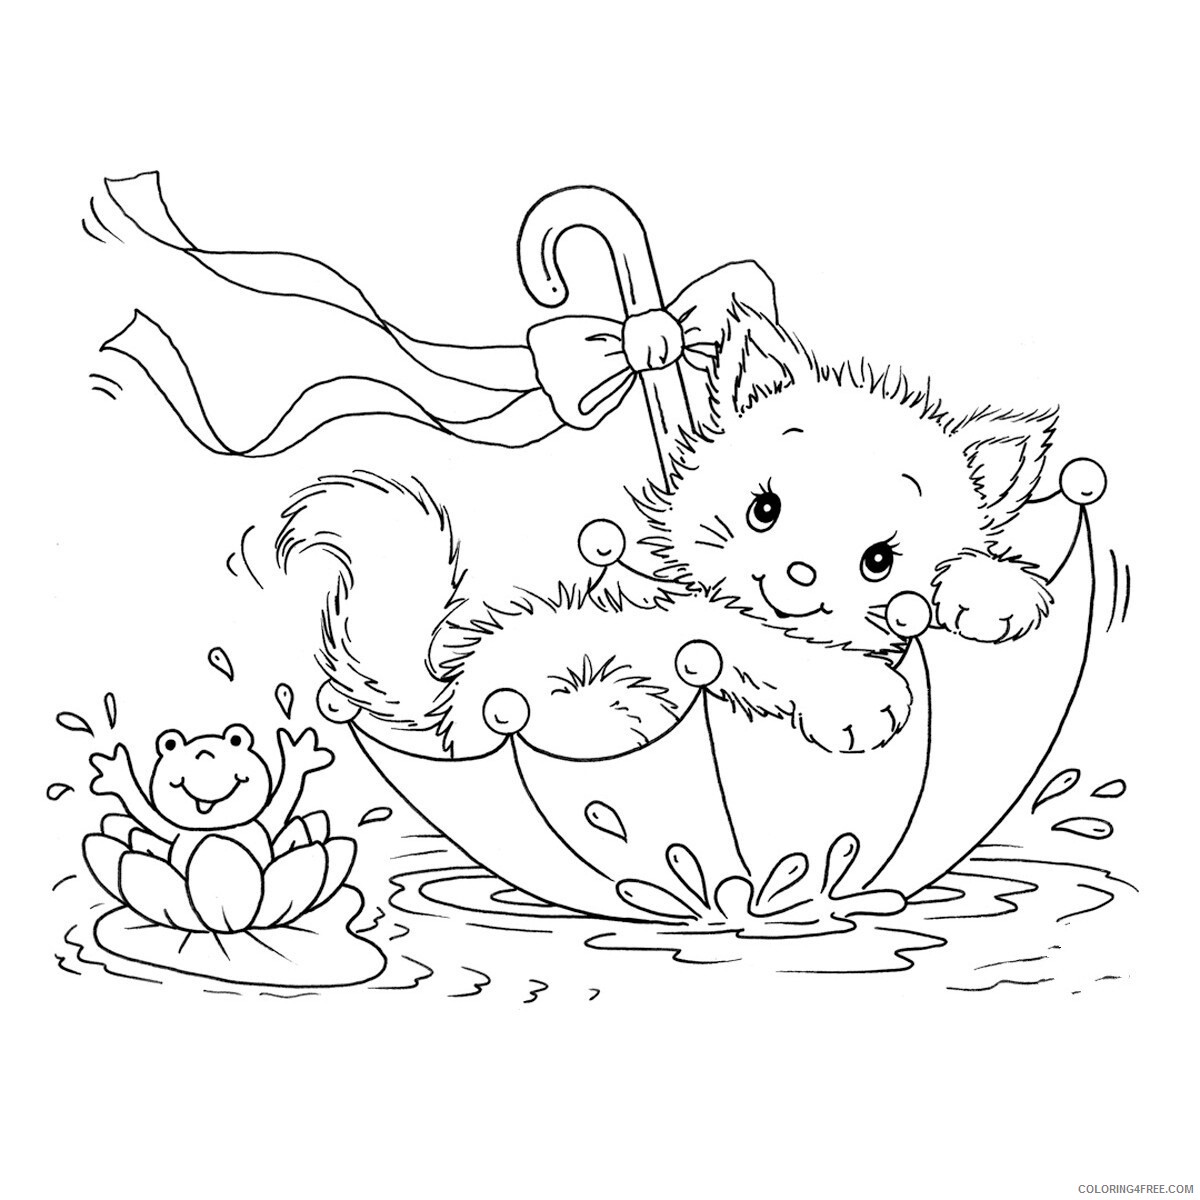 cat-coloring-pages-animal-printable-sheets-cat-2021-0861-coloring4free